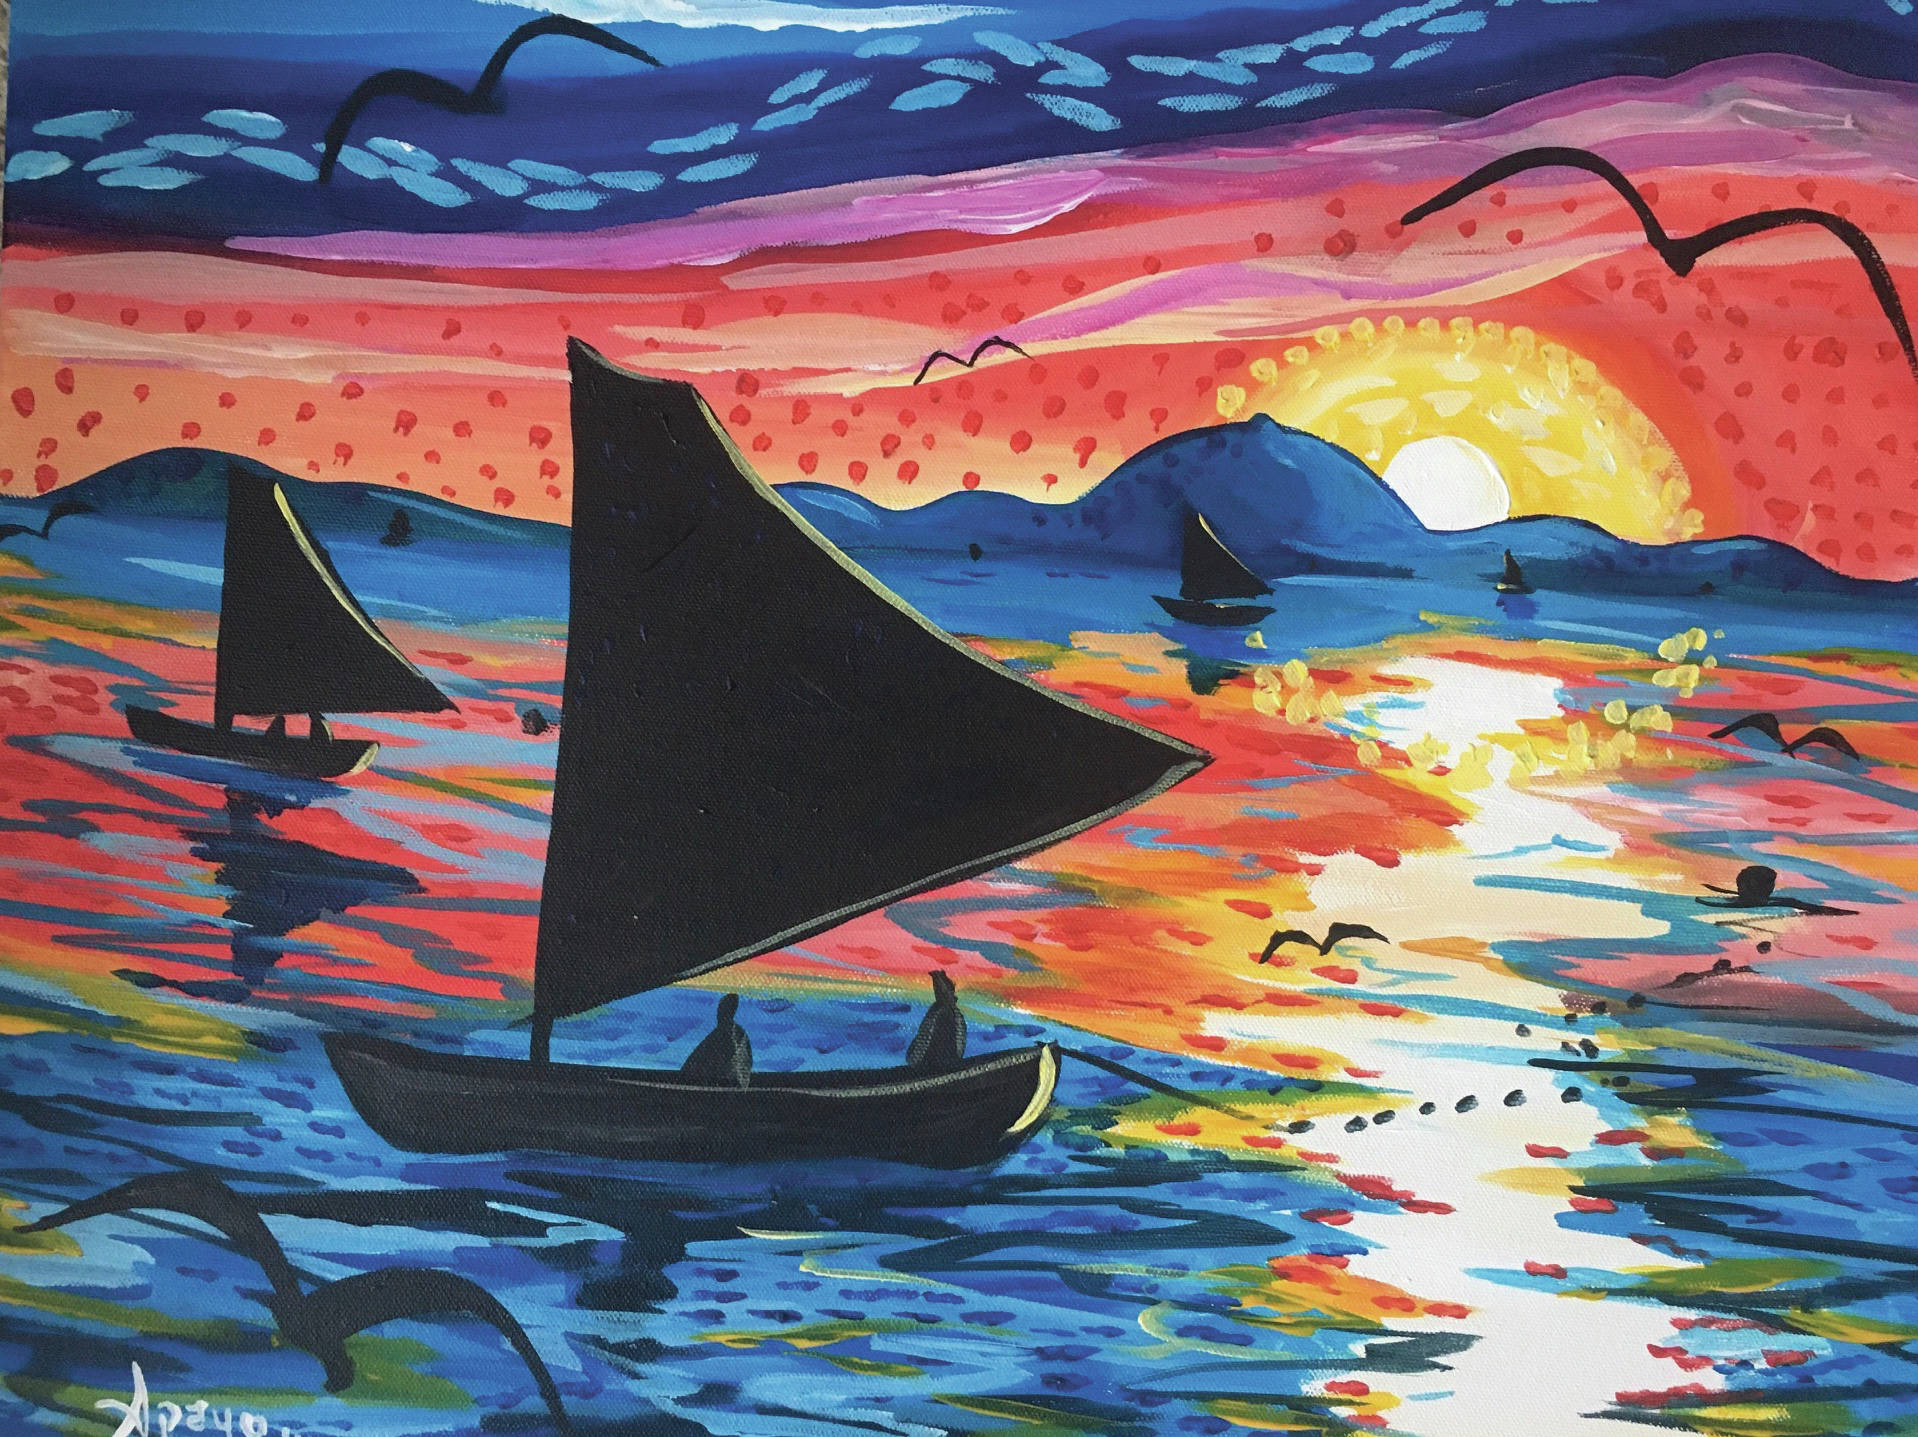 Apayo Moore’s painting is part of the Homer Council on the Arts’ Maritime Art show opening Friday, May 7, 2021, at the gallery in Homer, Alaska. (Photo courtesy of Homer Council on the Arts)